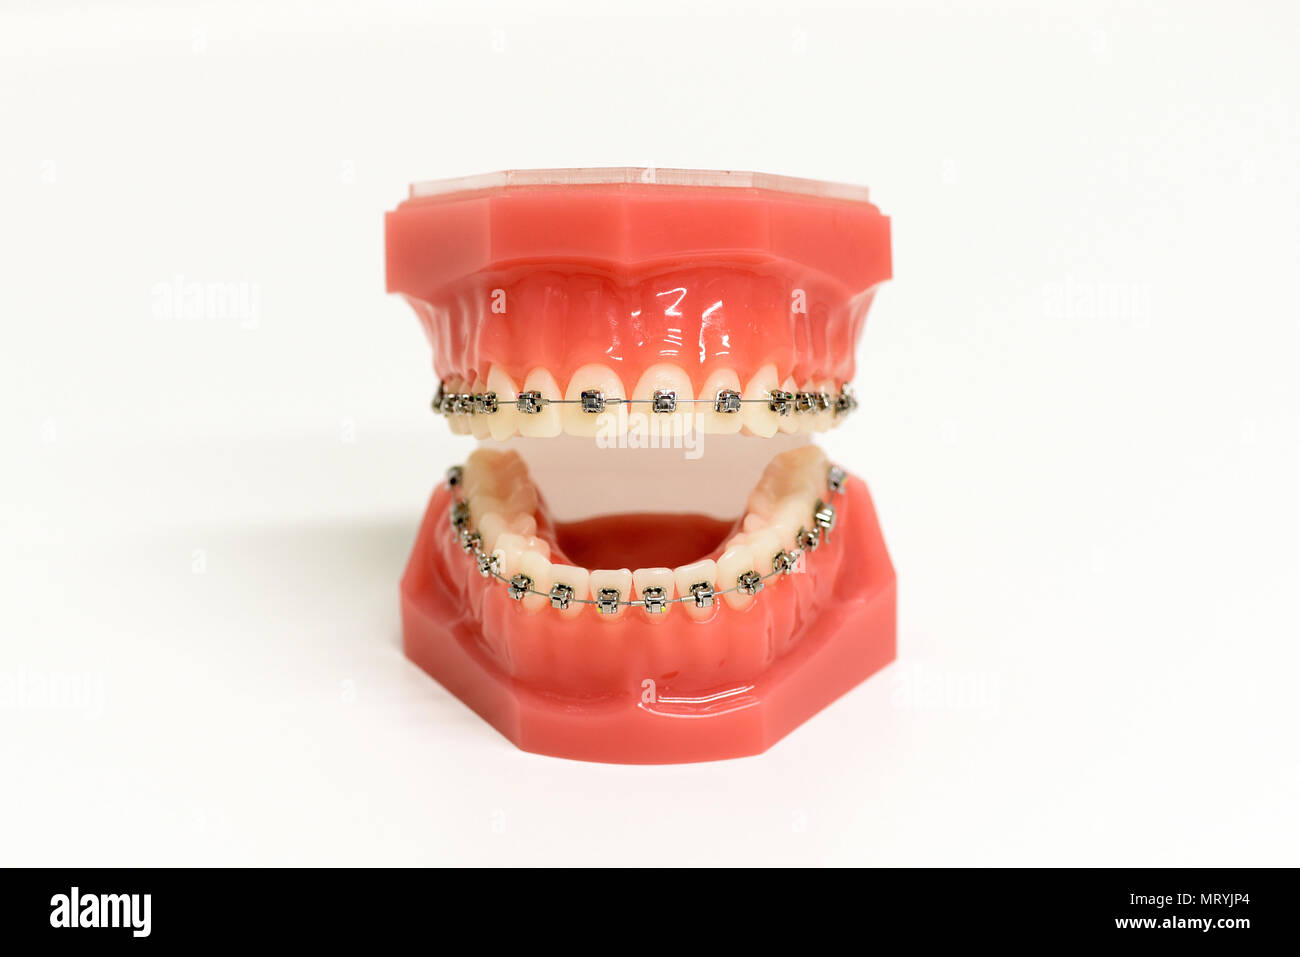 Orthodontic model of teeth with attached metal braces to straighten and align the teeth or correct the bite, open frontal view Stock Photo